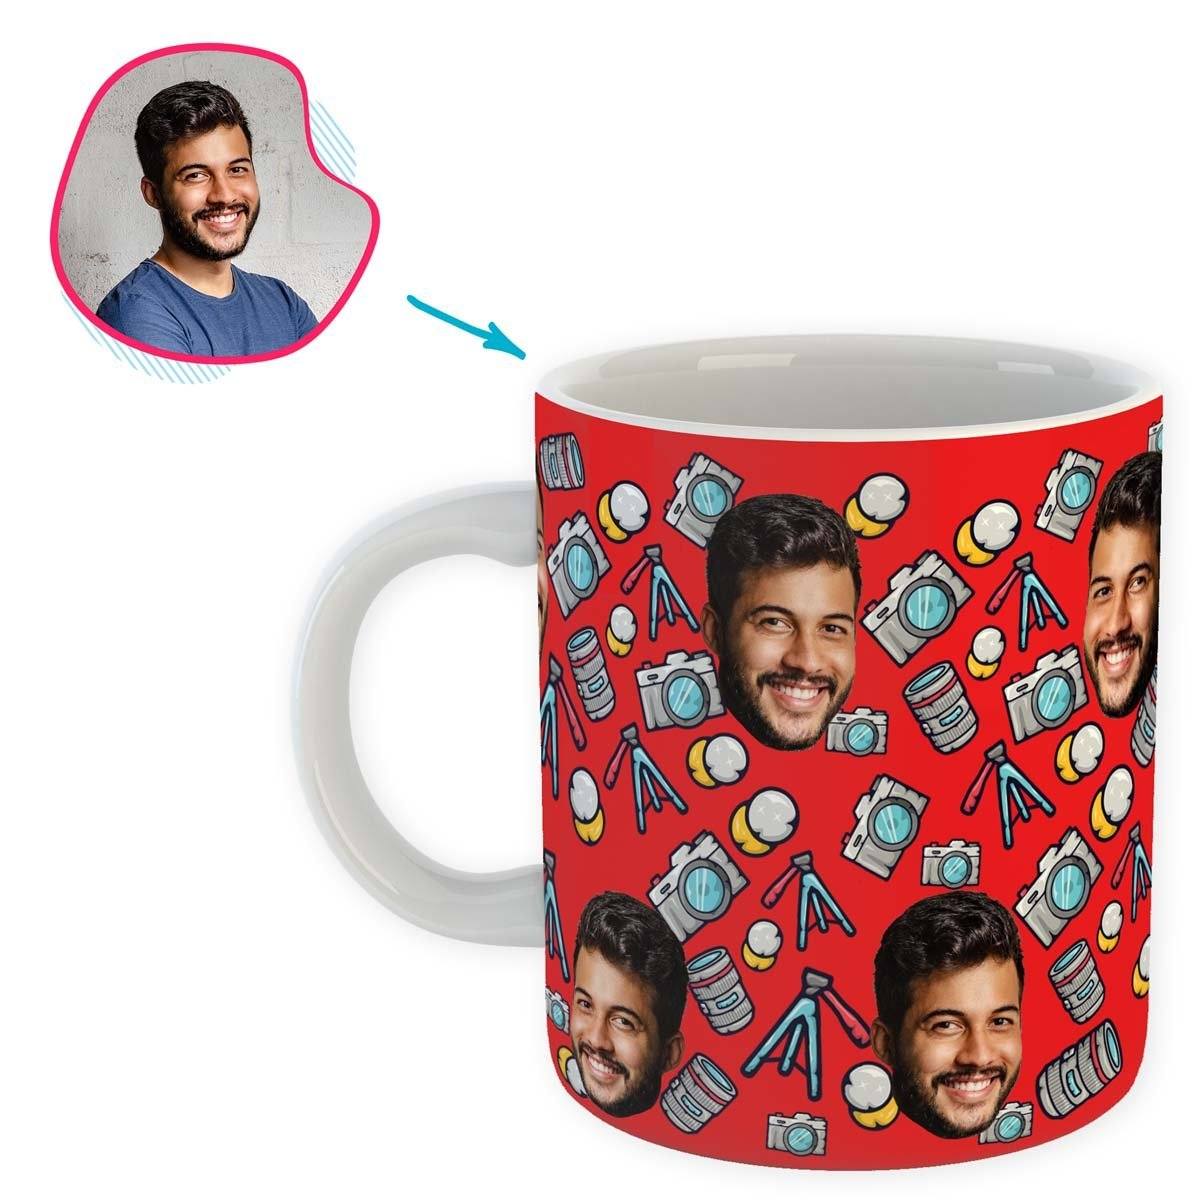 red Photography mug personalized with photo of face printed on it